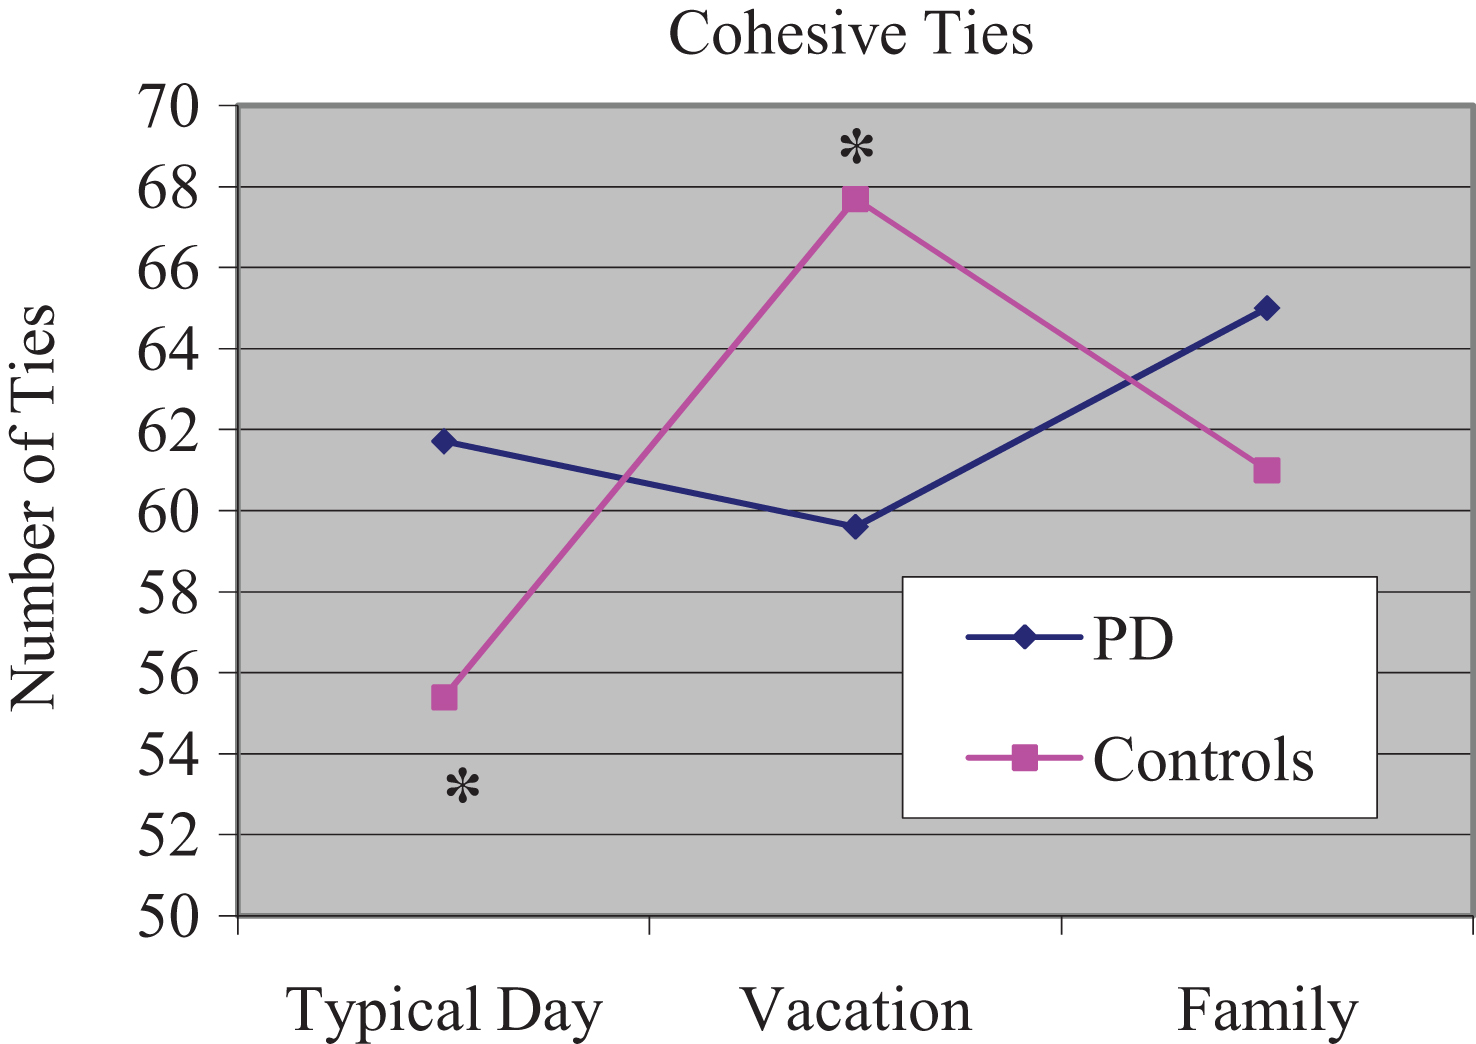 Mean number of cohesive ties for each narrative.  *Controls produced fewer cohesive ties during typical day compared to vacation.